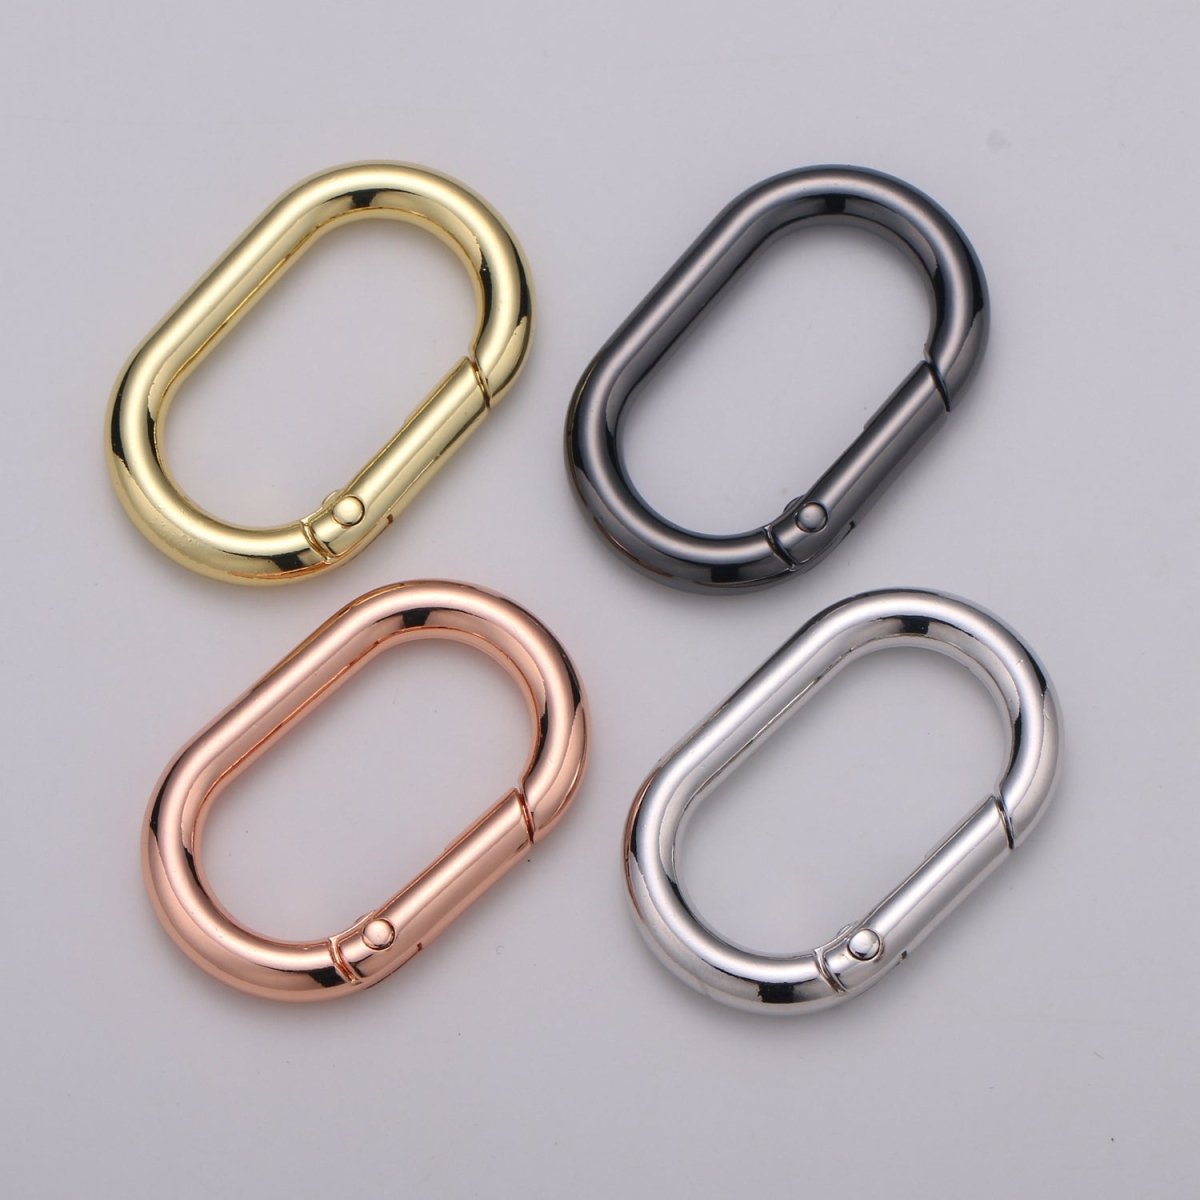 Chunky Gold Spring Gate Ring, Push Gate ring, 24x38mm Oval Ring, Charm Holder 24K Gold Filled Clasp for Link Chain Connector L-044~L-047 - DLUXCA